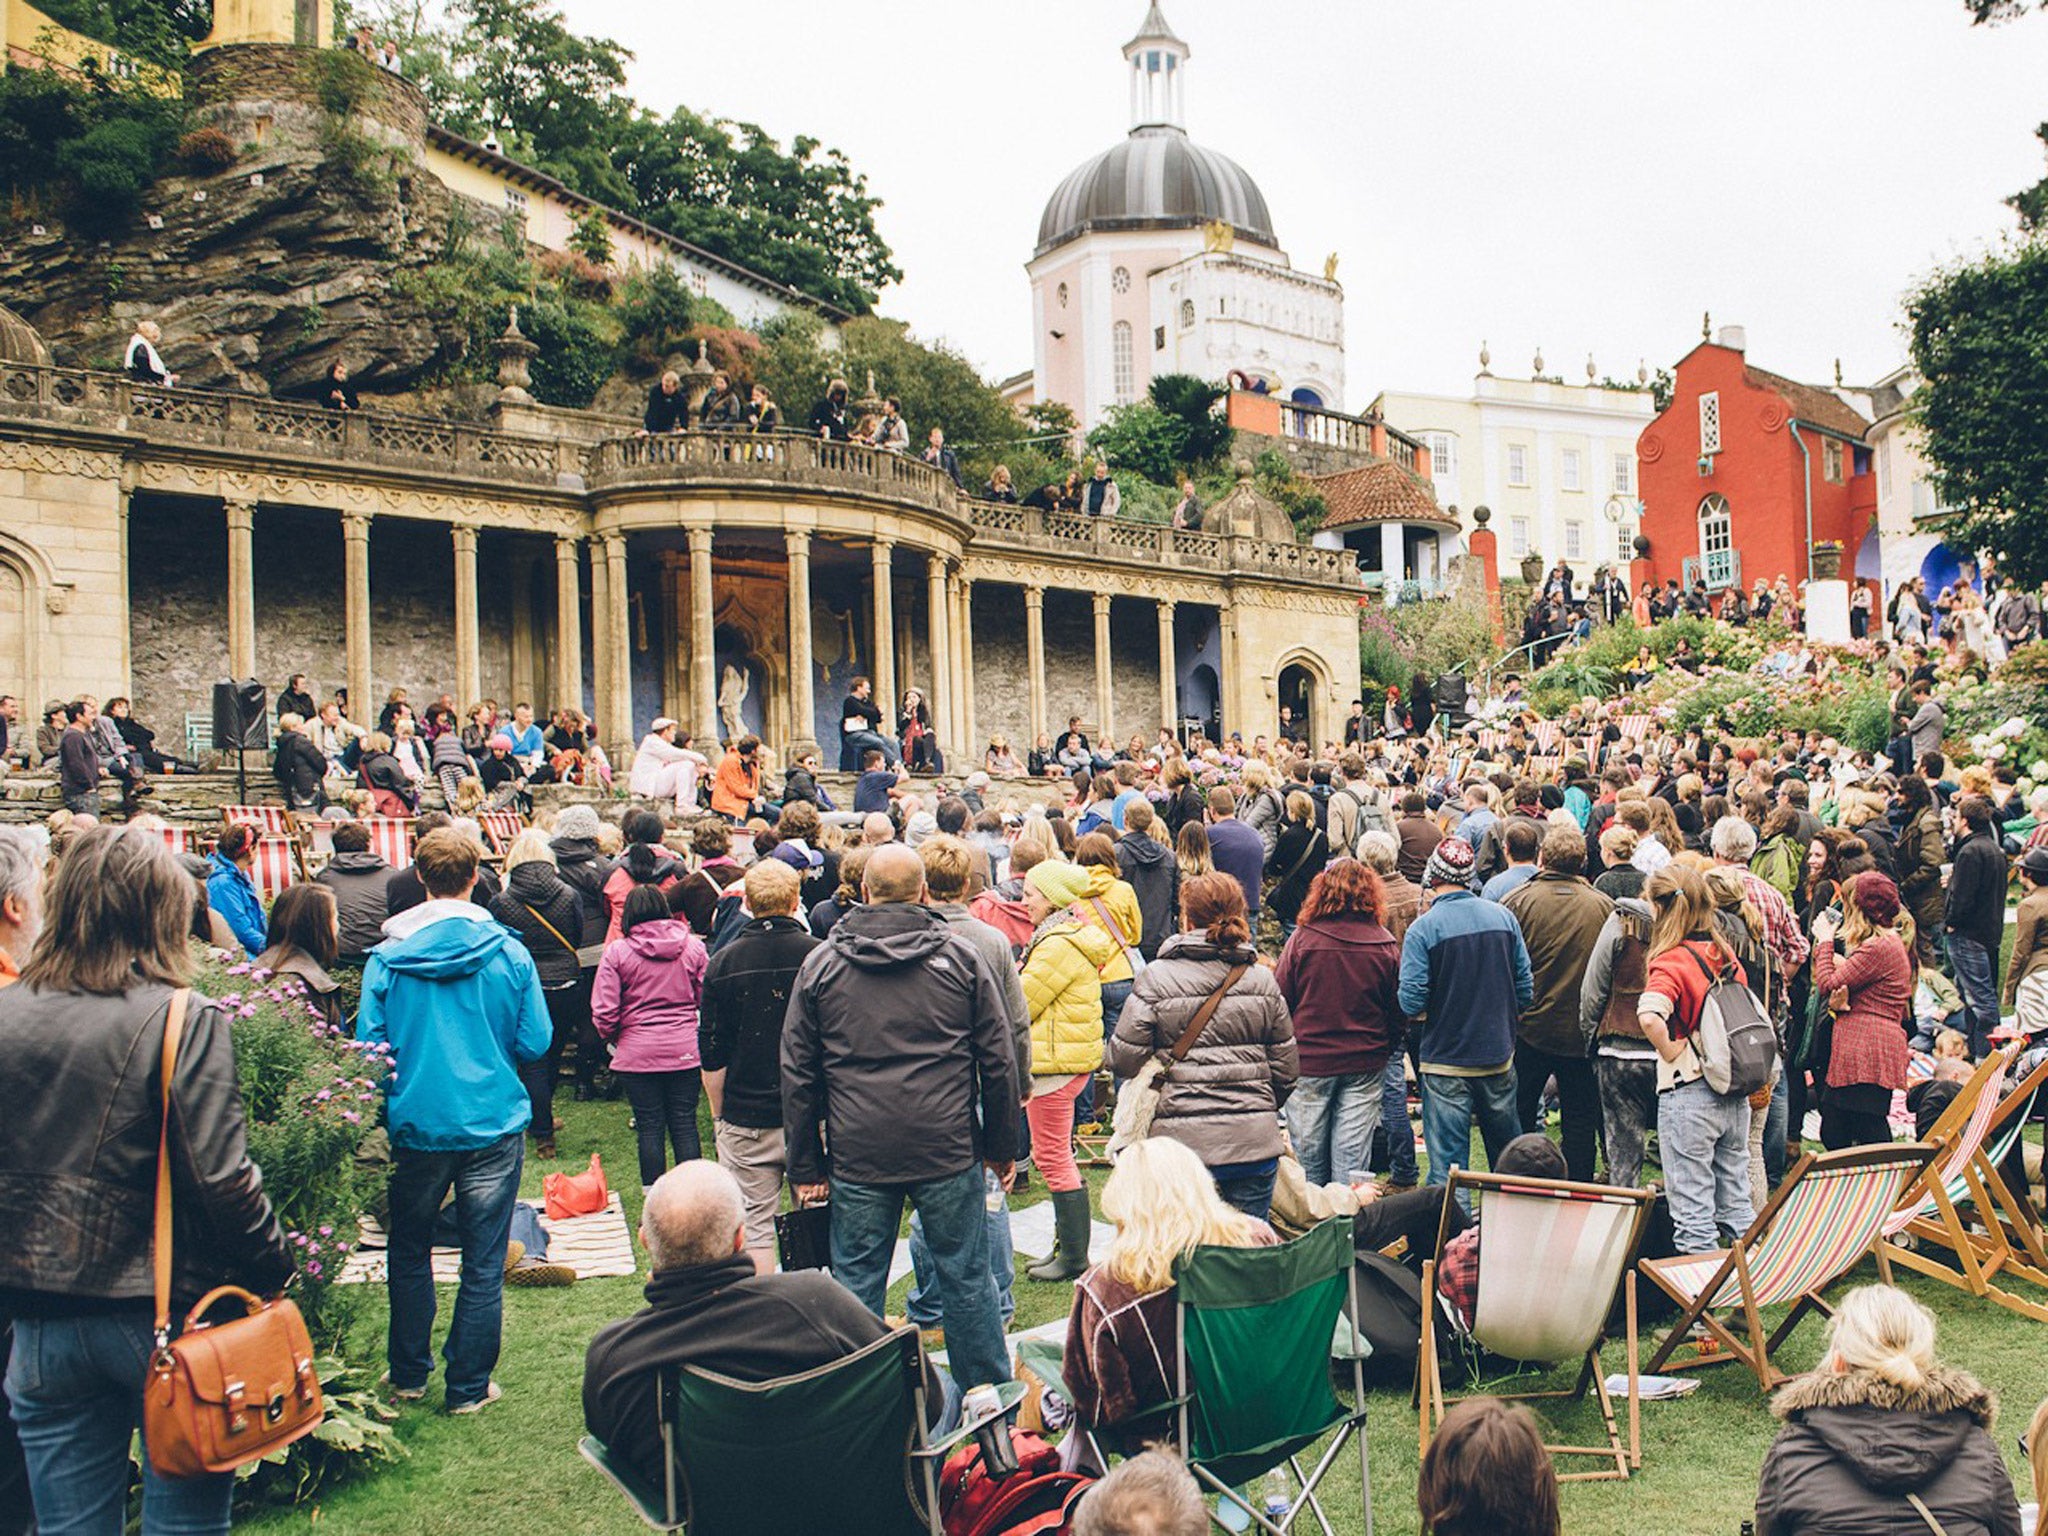 Festival No 6 describes itself as a 'bespoke banquet of arts and culture'